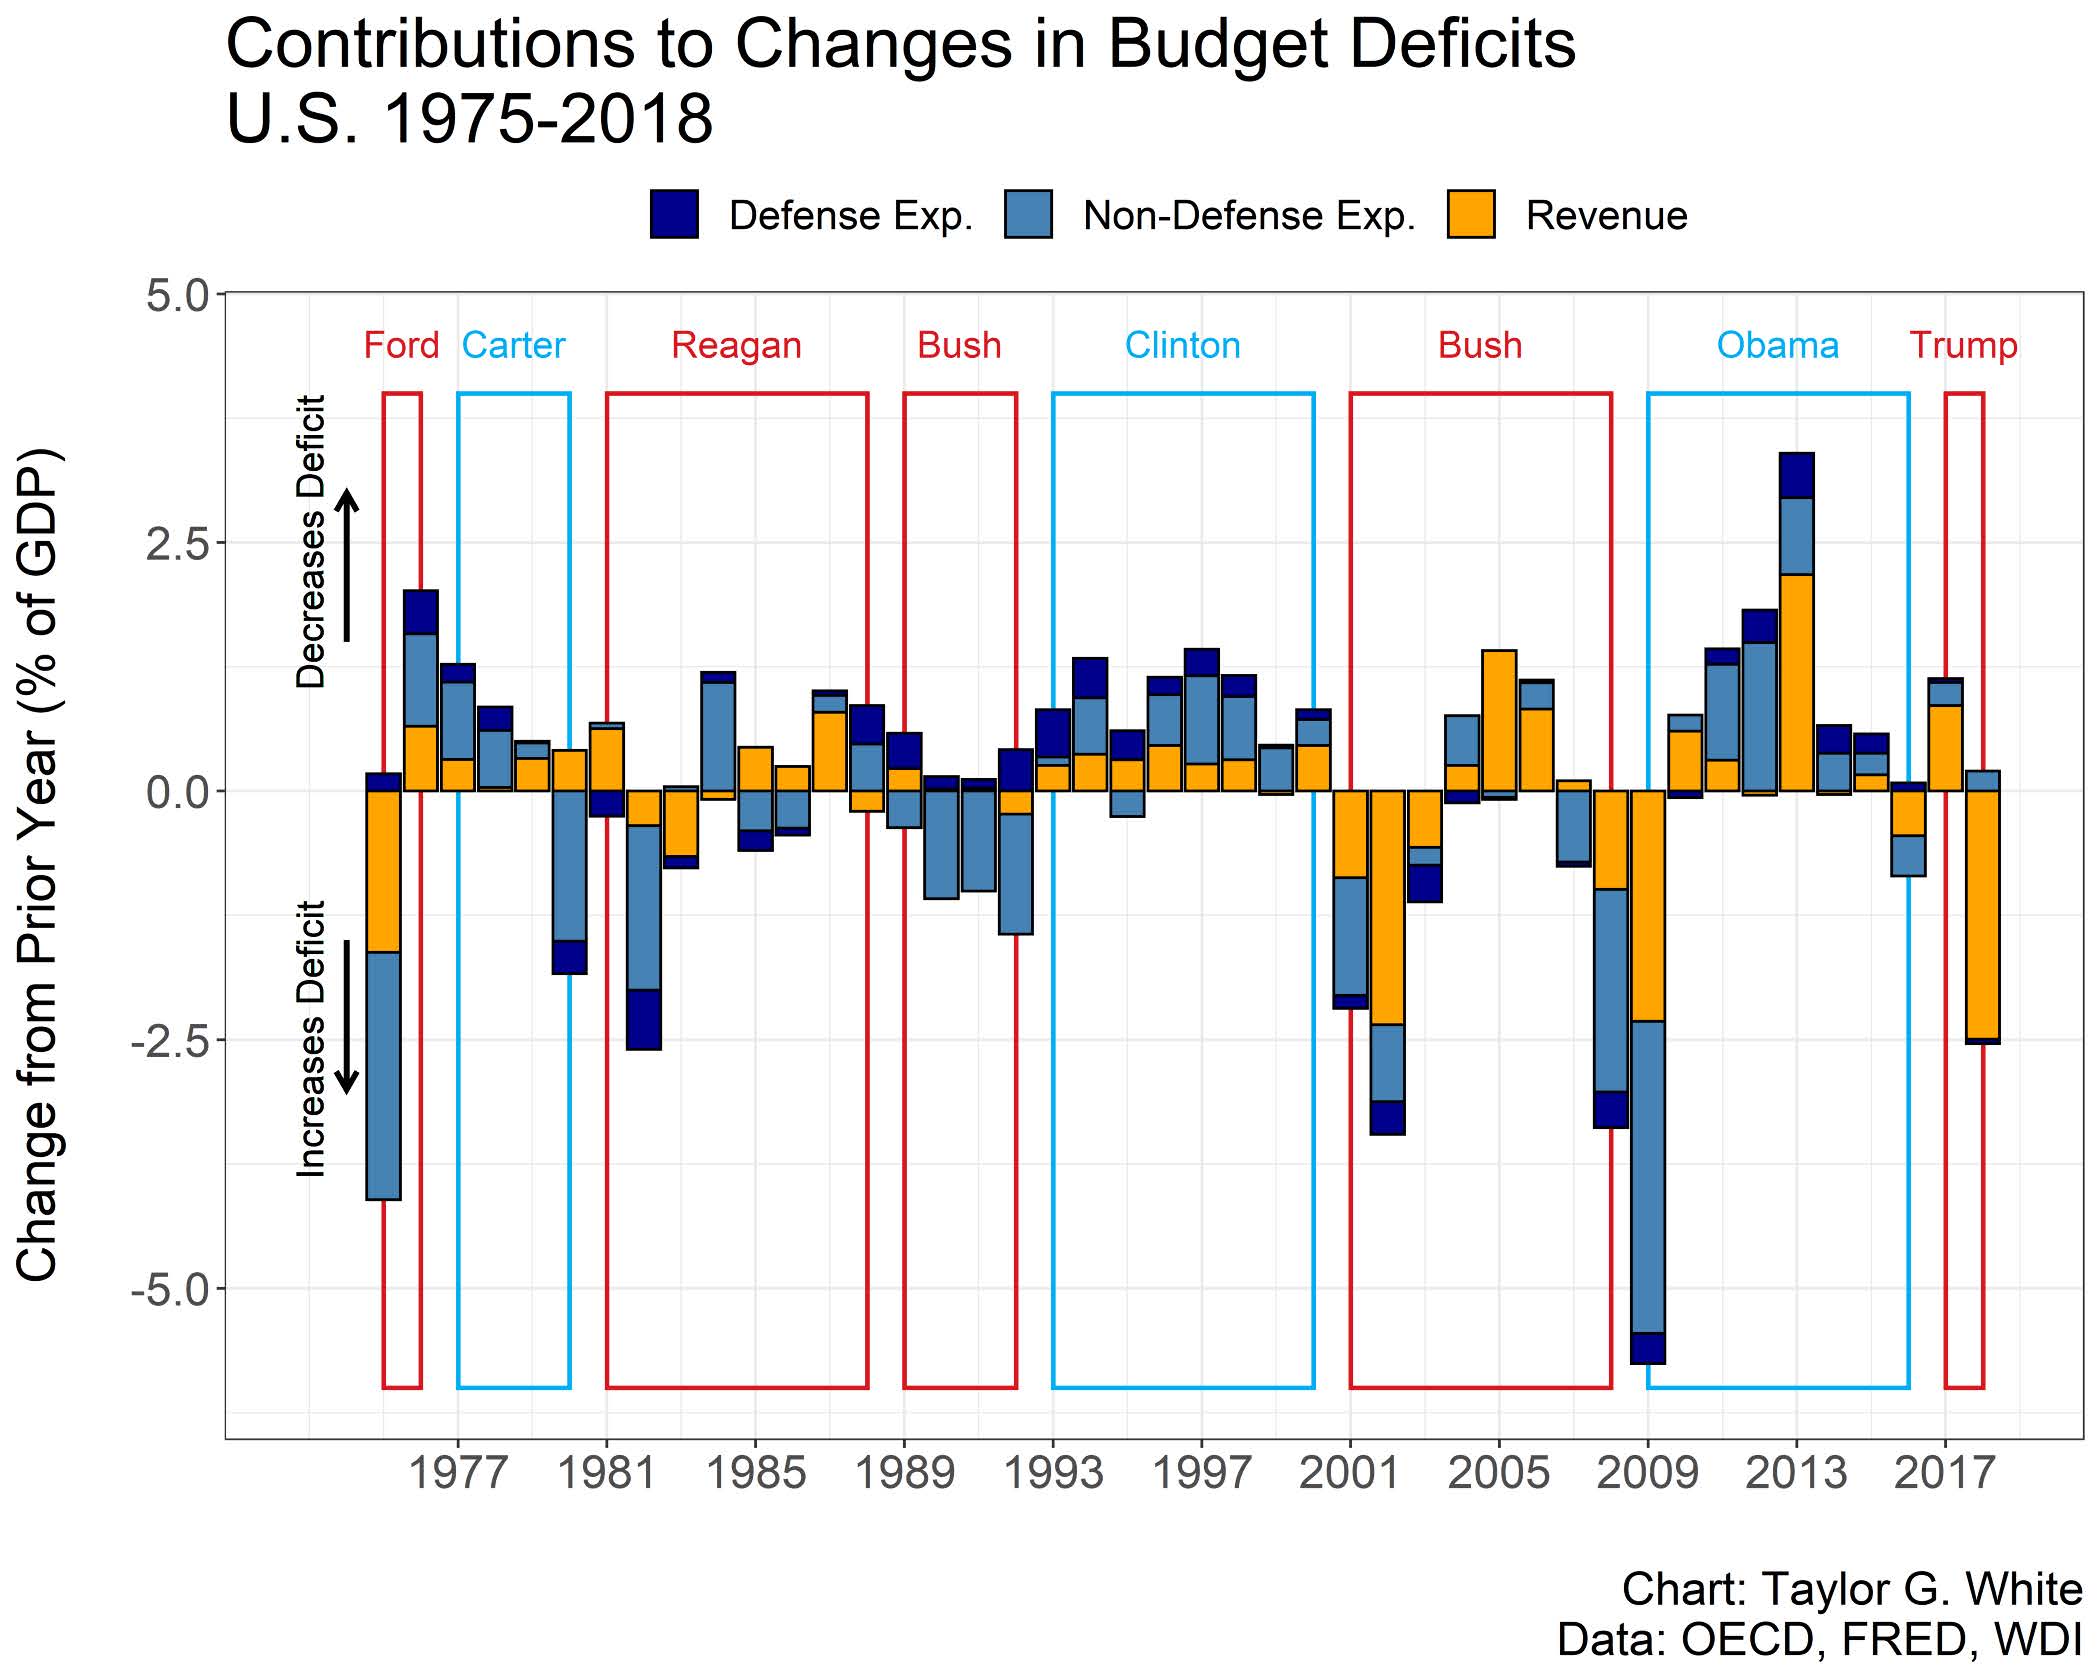 A chart showing contributions to changes in budget deficits